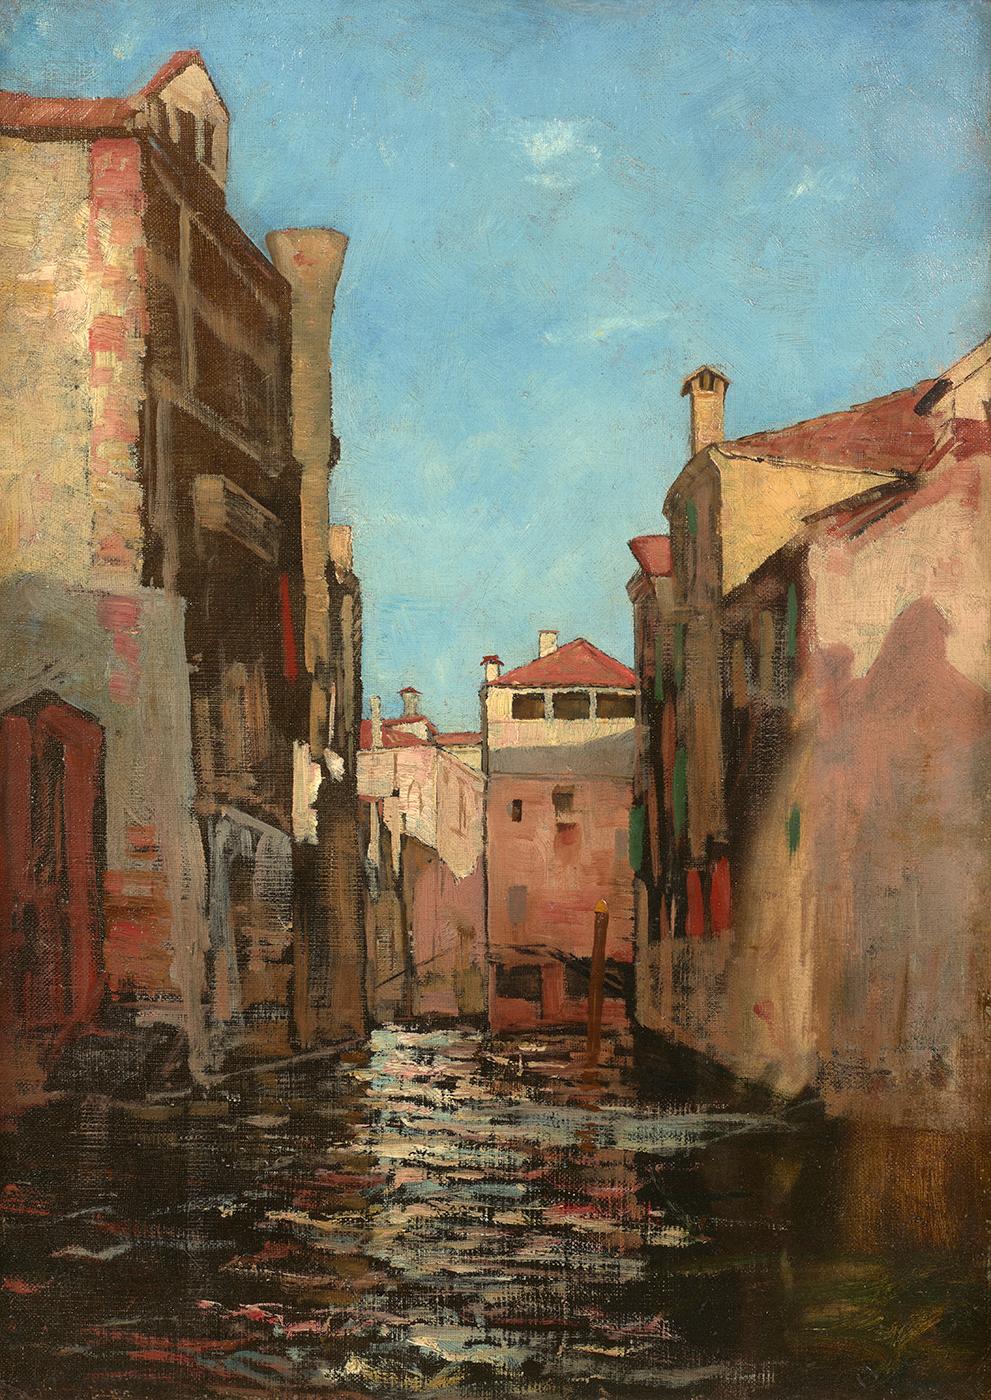 Canal in Venice - Painting by Benjamin Ferris Gilman